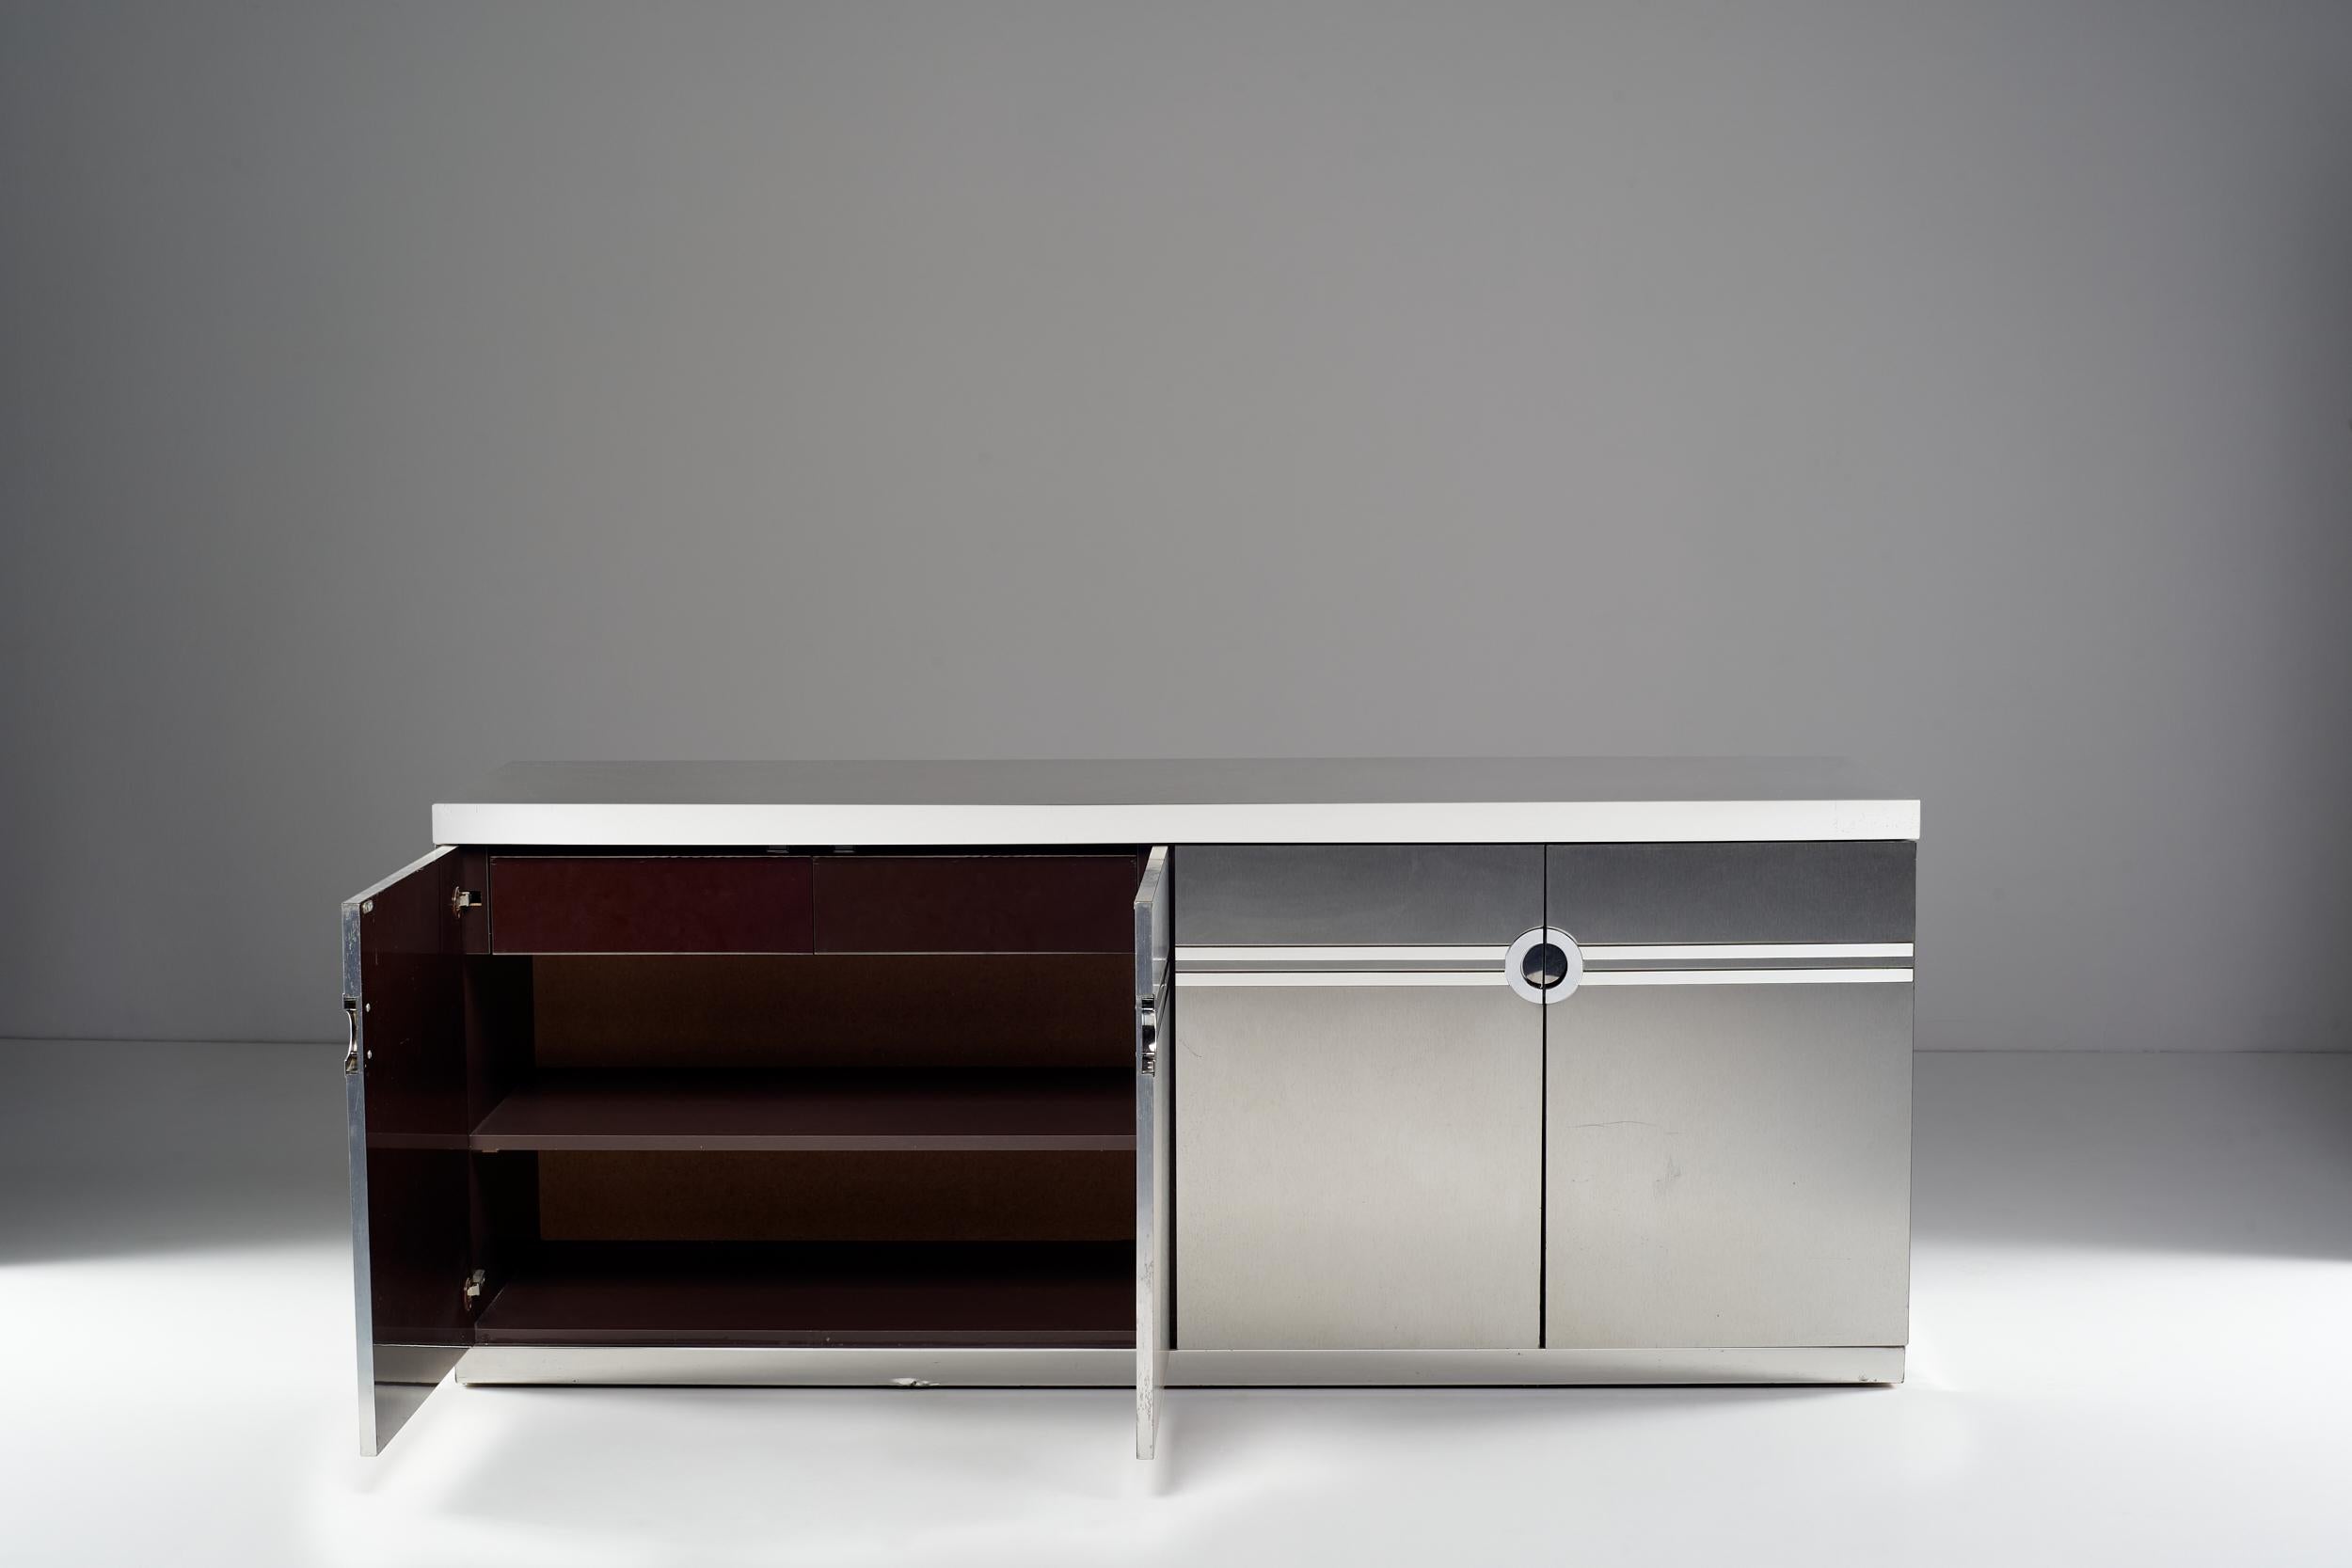 The Cardin sideboard, was designed with a wooden structure and covered with steel and laminate. The decoration of the front plays on the alternation between raw and laminate. The horizontal bands converge in cross-shaped squares and form a 